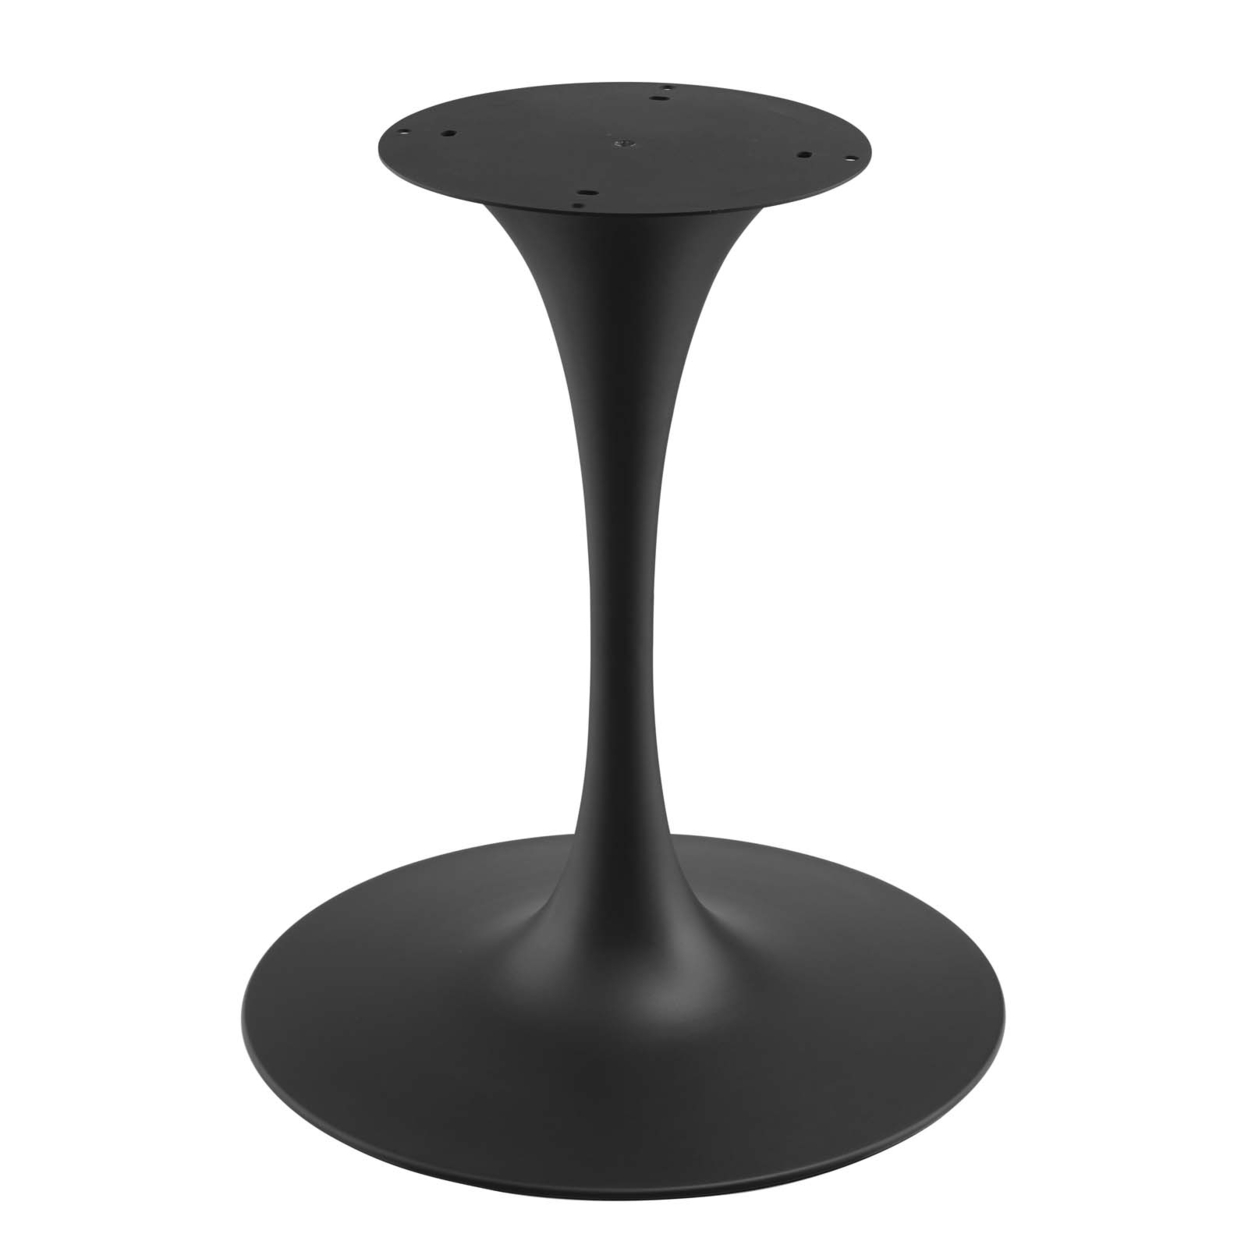 Lippa 54 Artificial Marble Oval Dining Table, Black Black